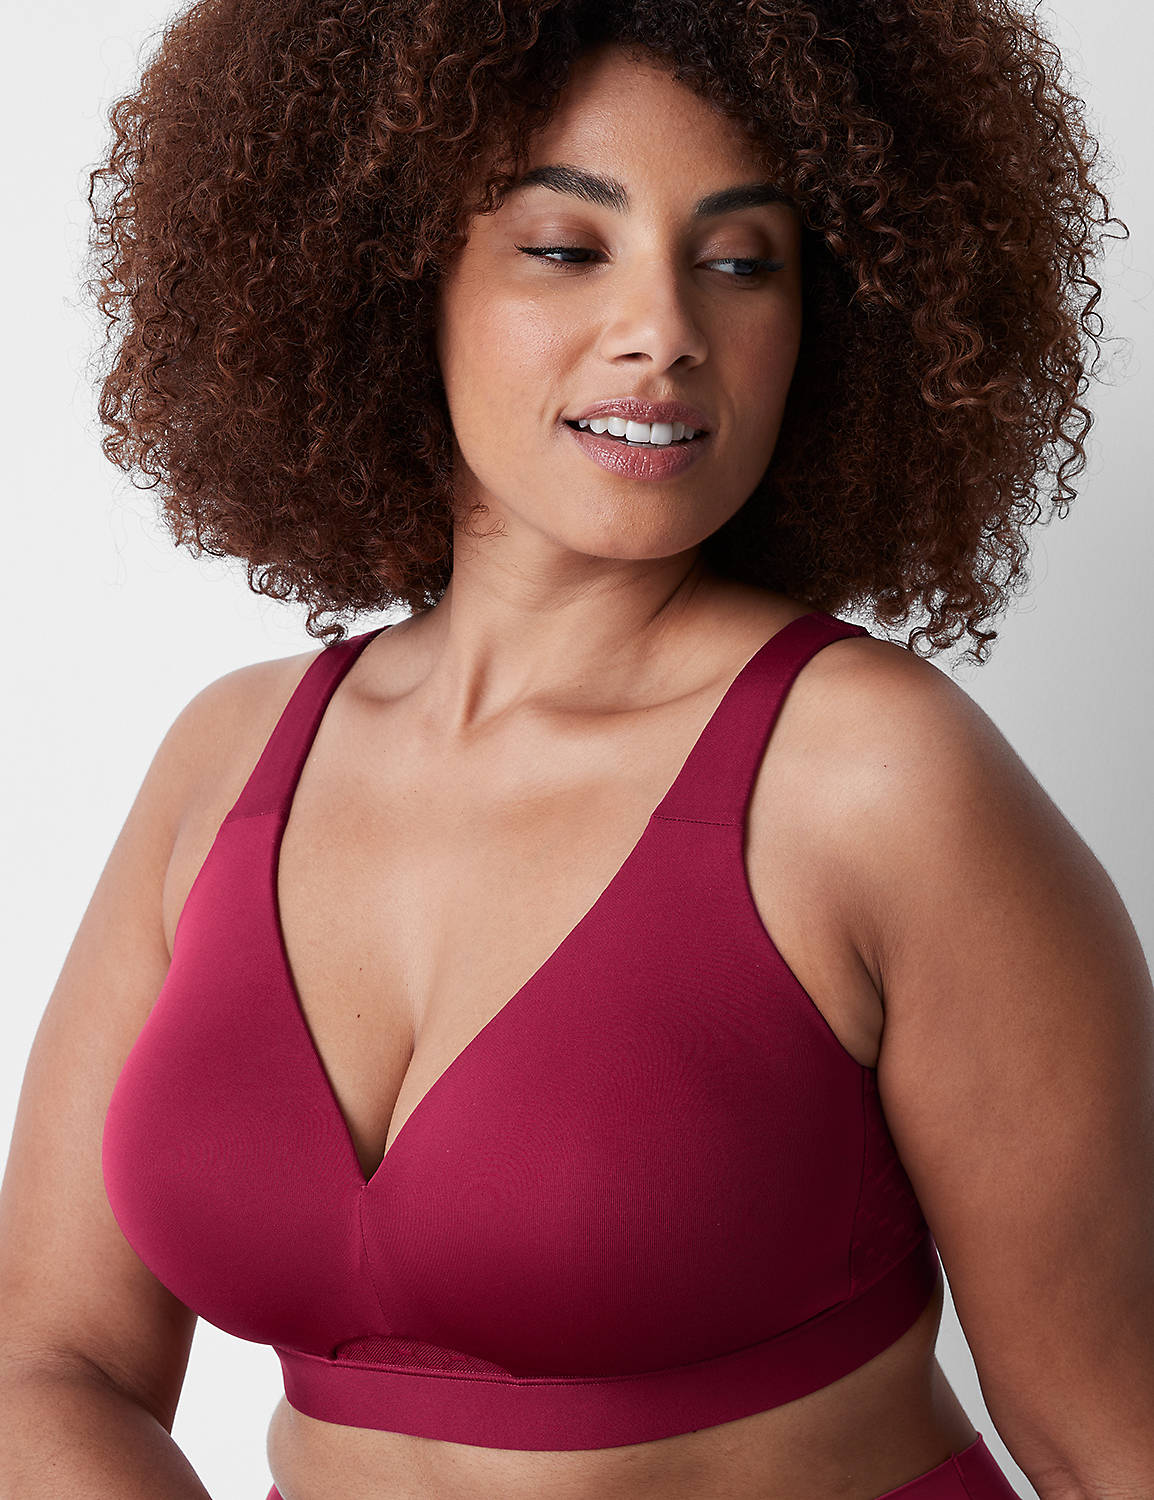 Lane Bryant - Tried our most-loved Comfort Bliss bras yet?